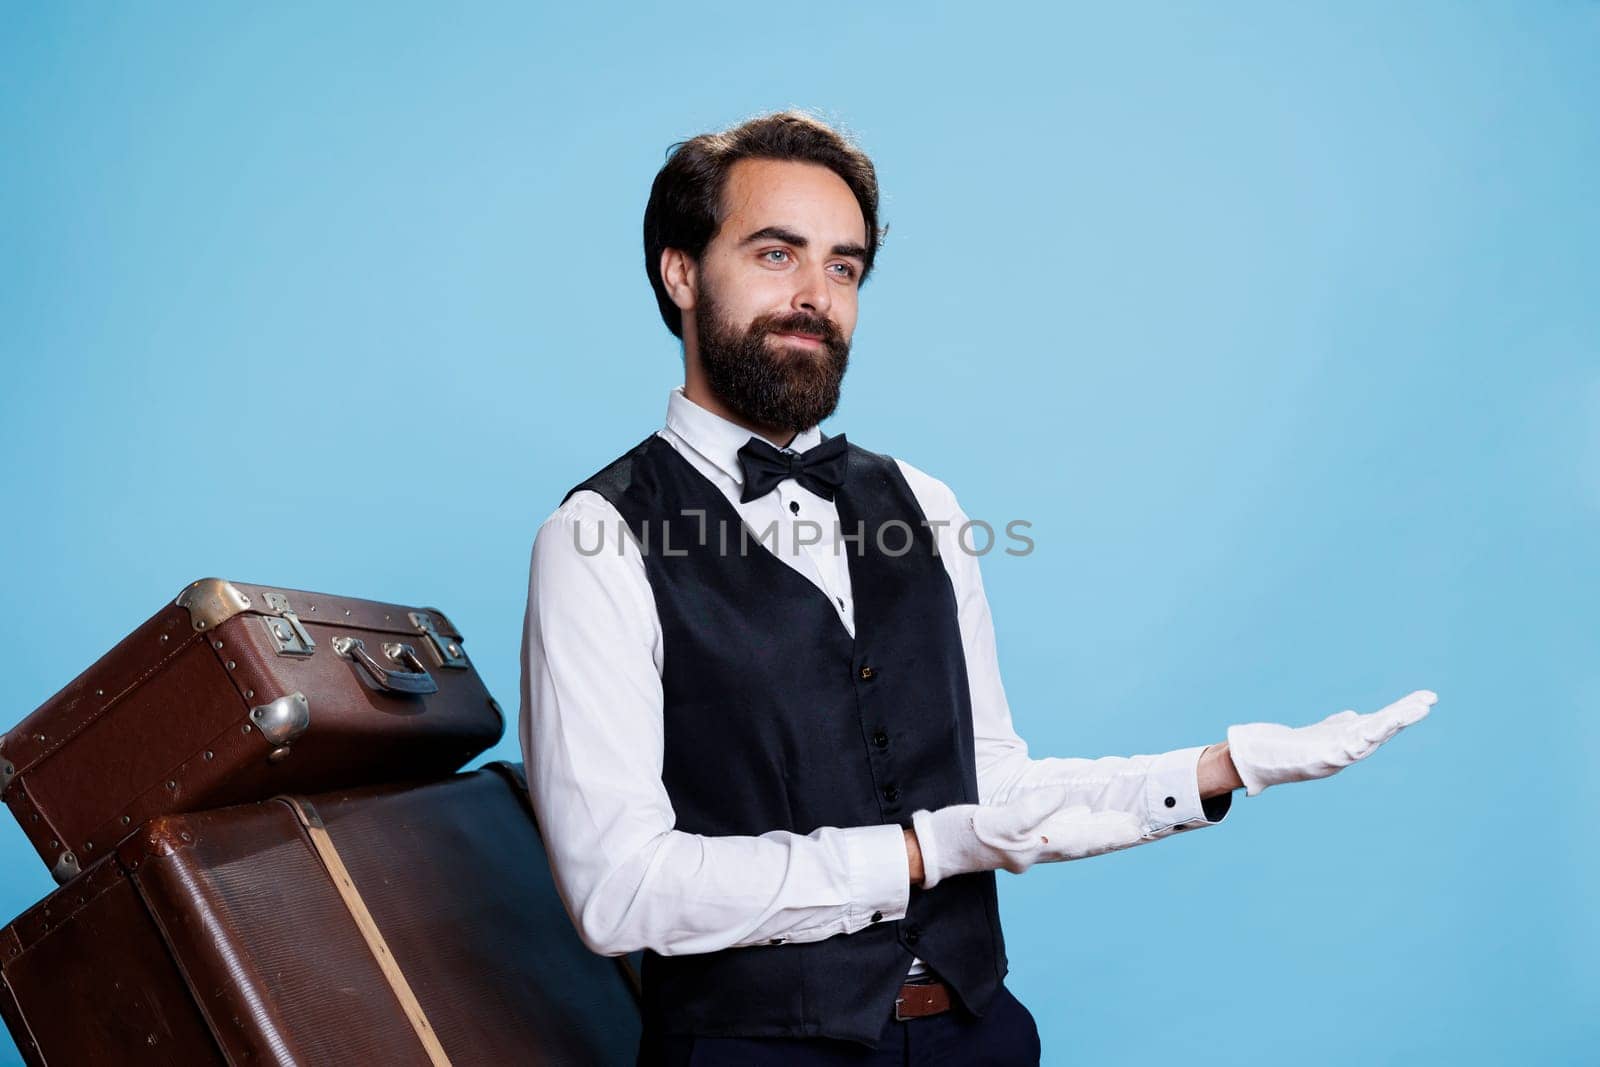 Hotel porter shows left side on camera, wearing professional suit and gloves while he does an advertisement, suggesting direction sideways. Elegant doorkeeper presents ad in studio.